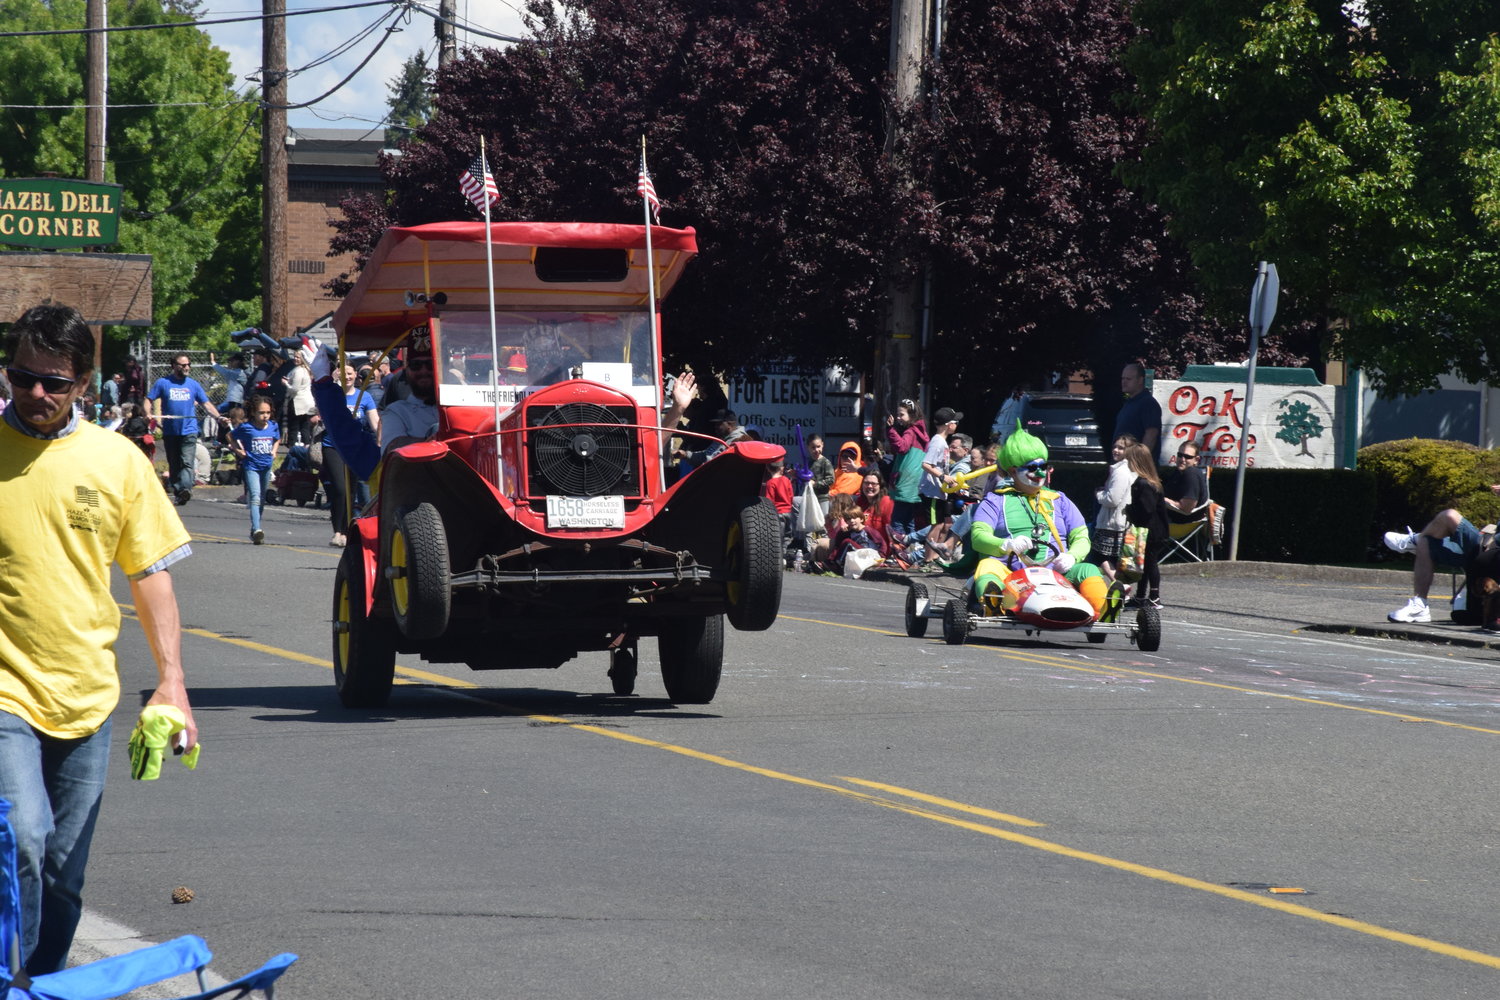 A vintage car pops a wheelie alongside a clown during the 2022 Parade of Bands in Hazel Dell on May 21.